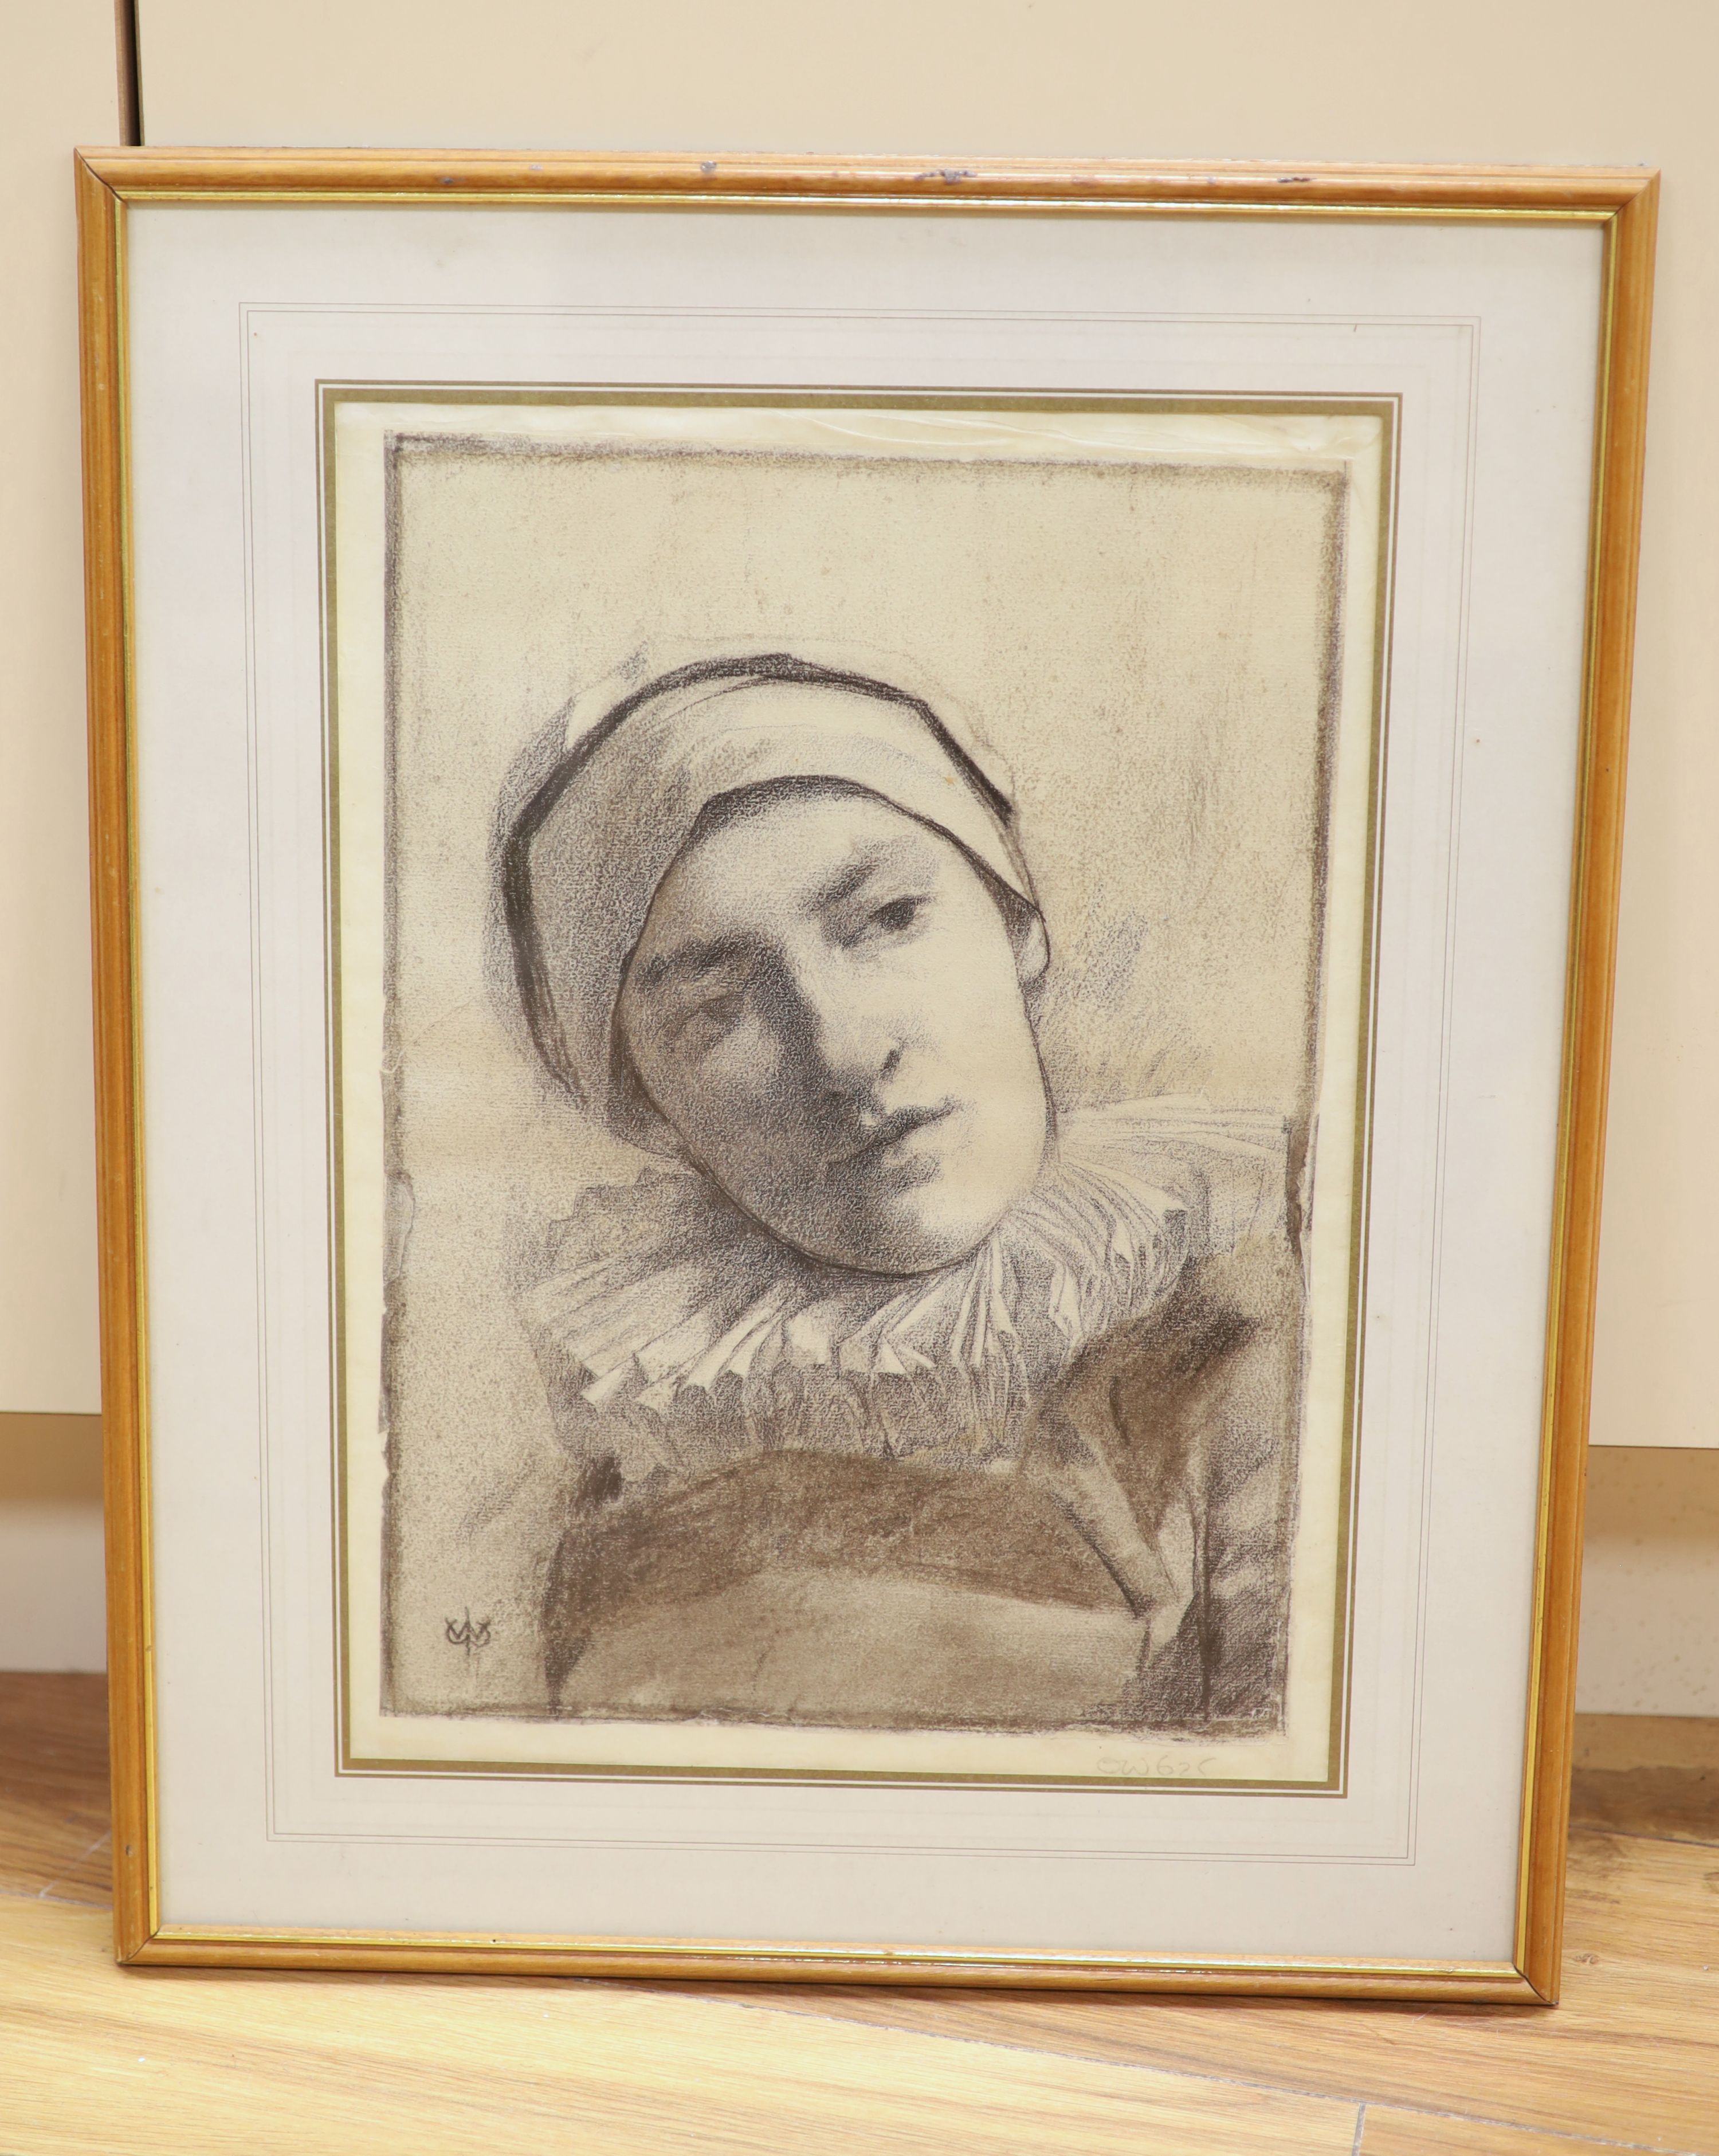 Attributed to William John Wainwright (1855-1931), charcoal drawing, Portrait of Pierrot, monogrammed, 37 x 26cm